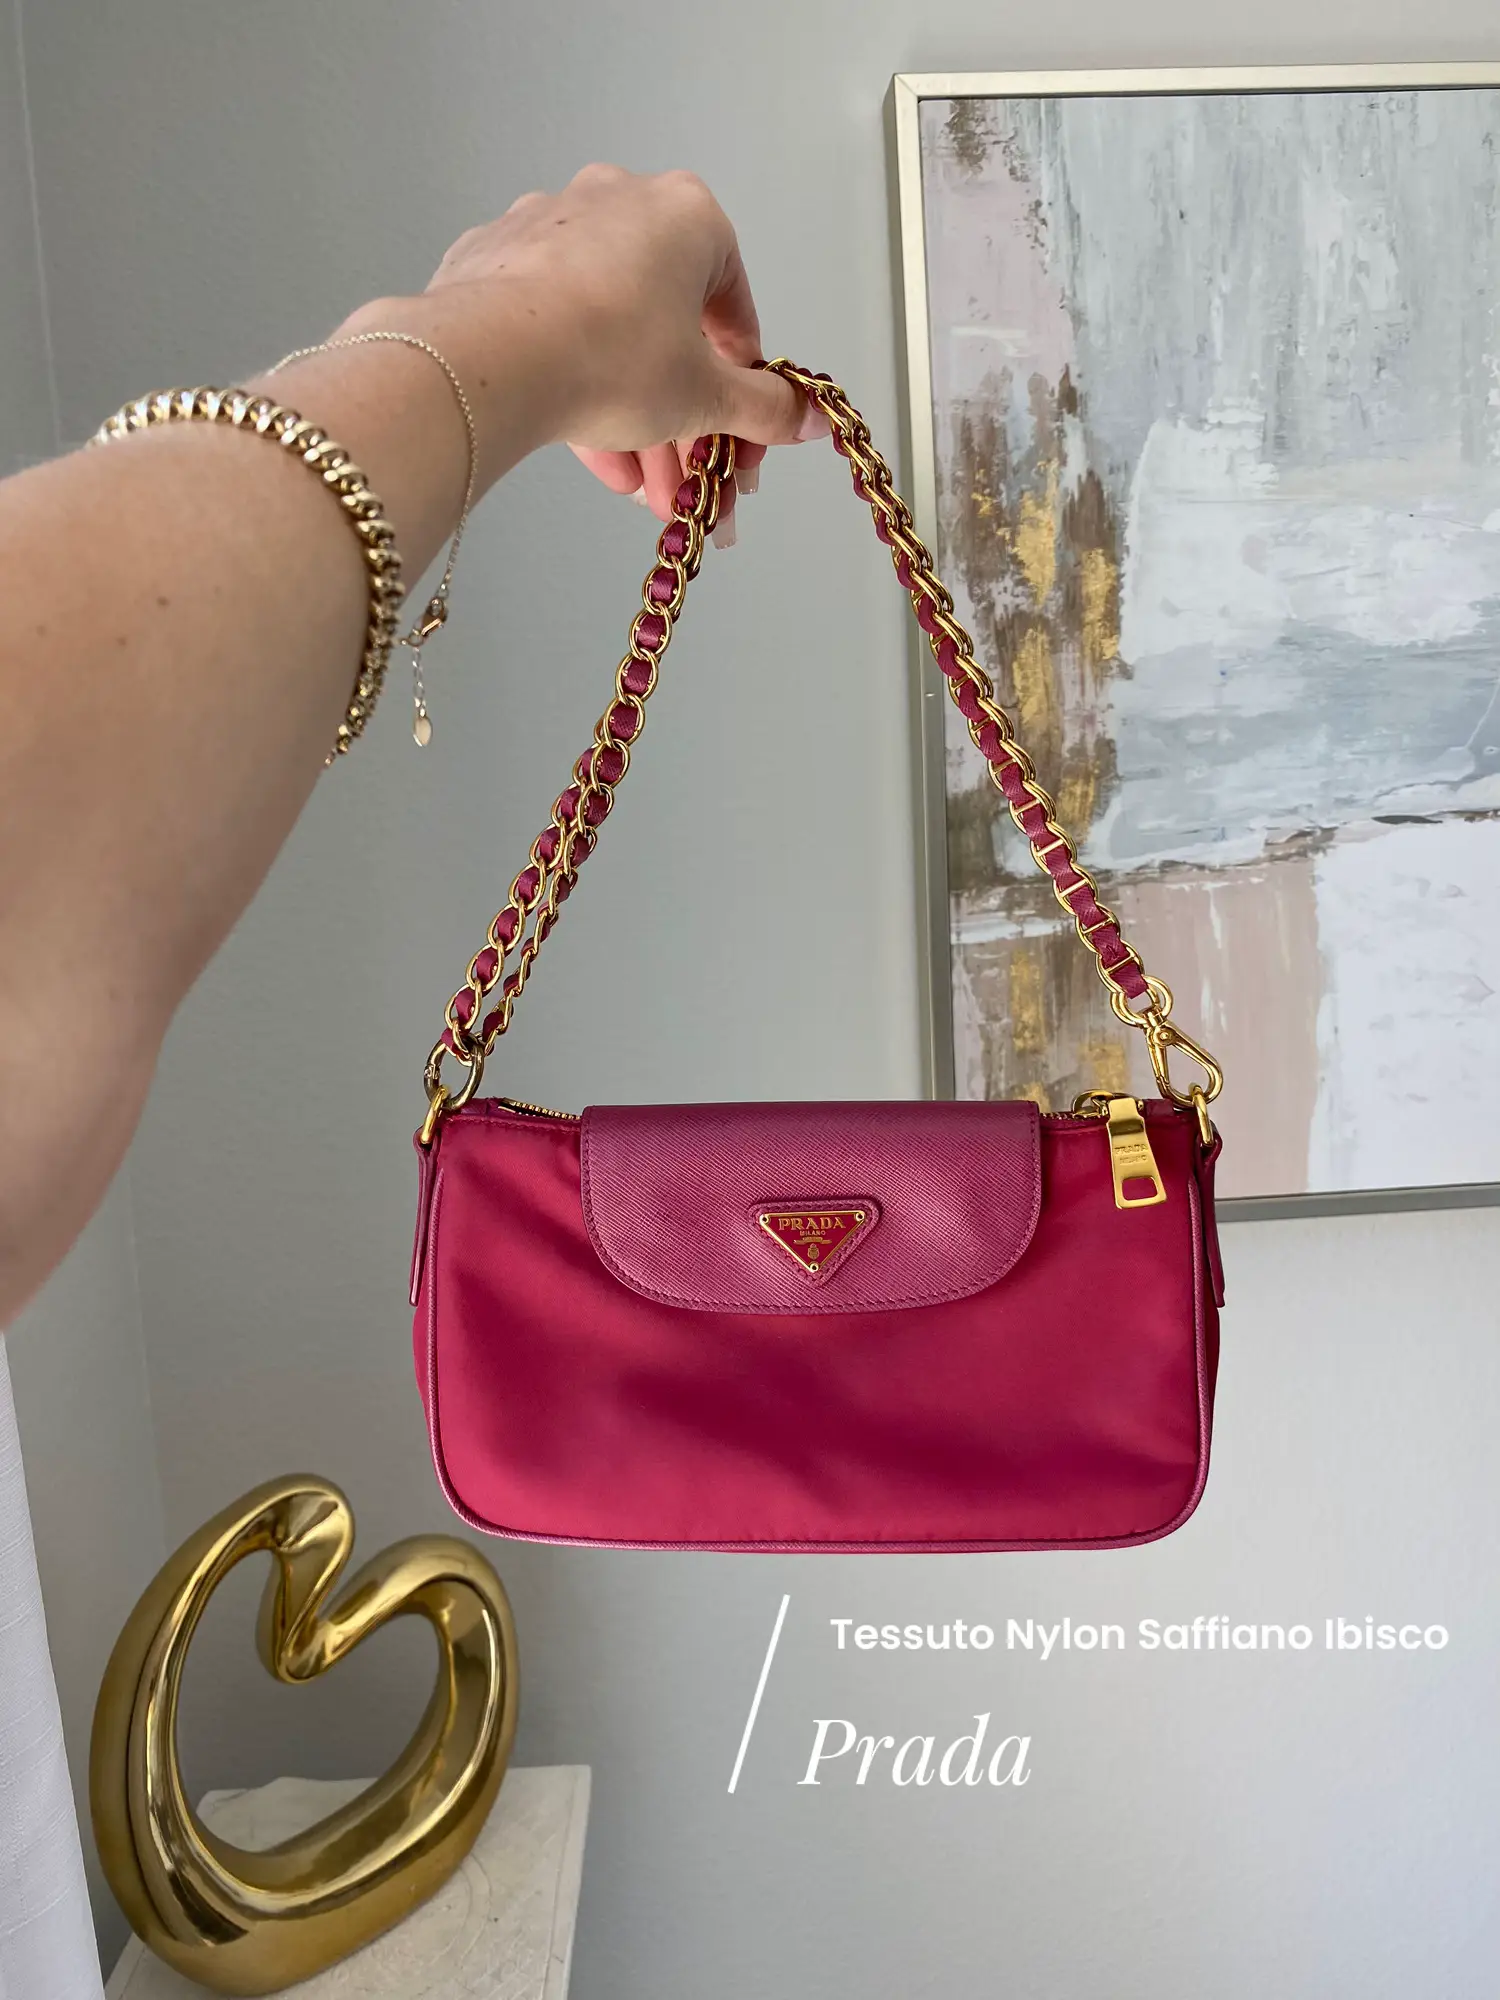 New Arrivals! Pre-Owned Luxury from Louis Vuitton and Chanel  Back from  vacation, DZ and Beth at Mills Jewelers & Loan in Camarillo California  show off some exciting NEW ARRIVALS! See our